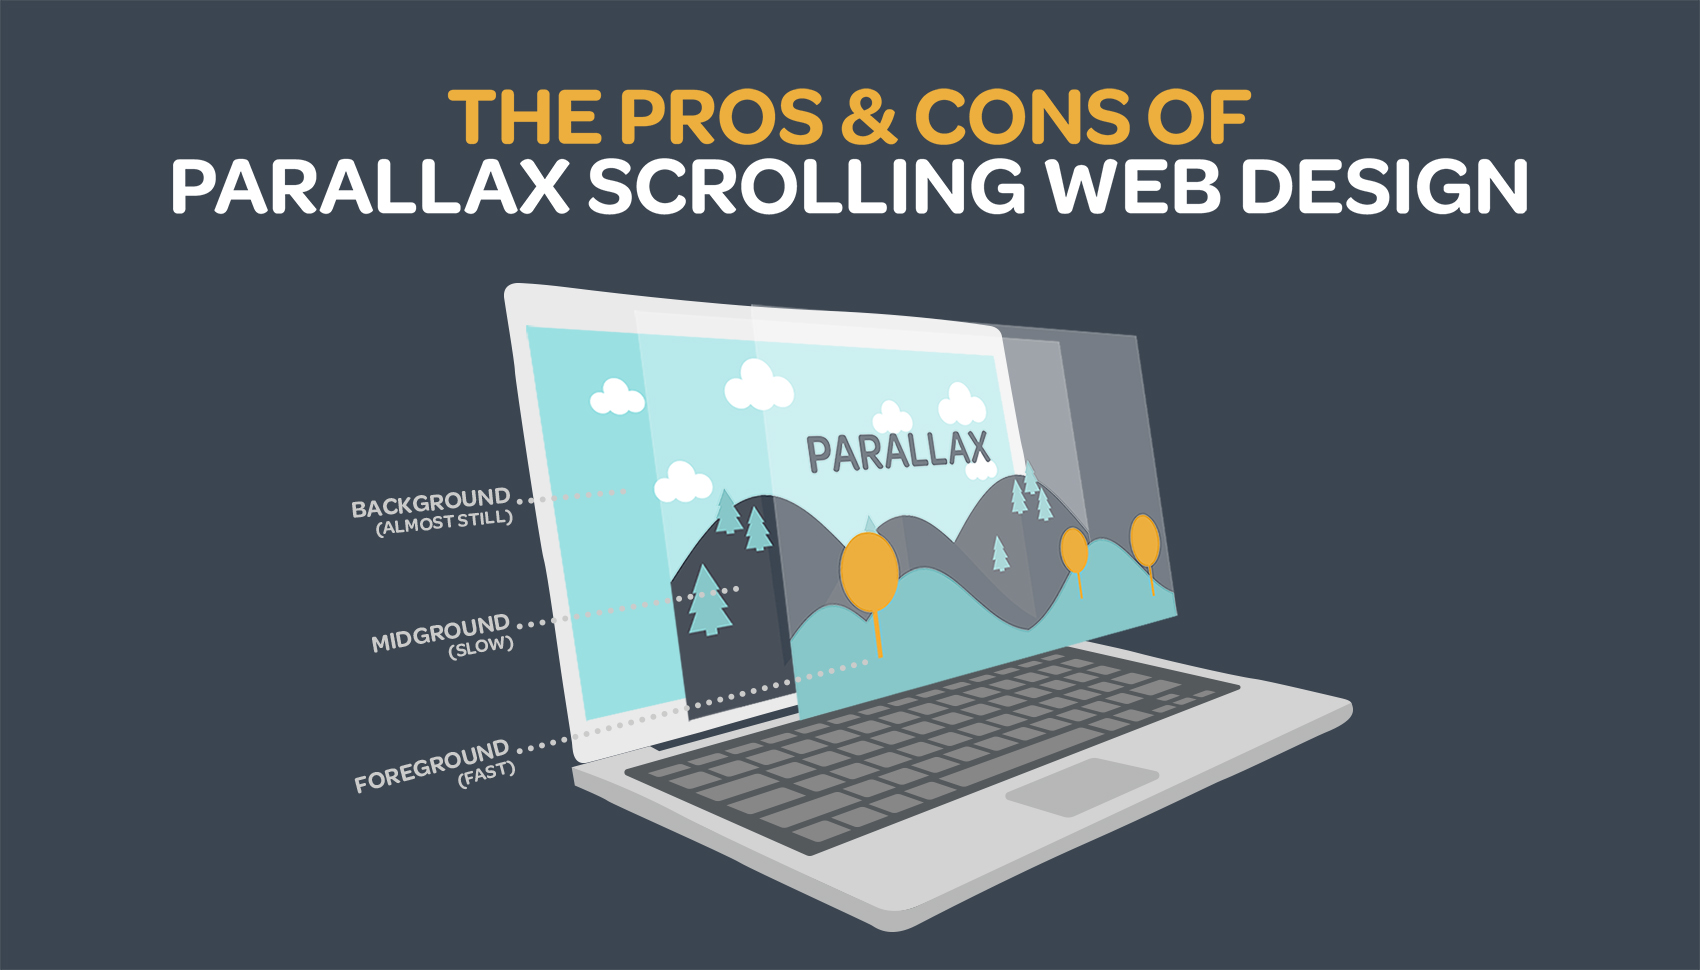 The pros and cons of parallax scrolling web design